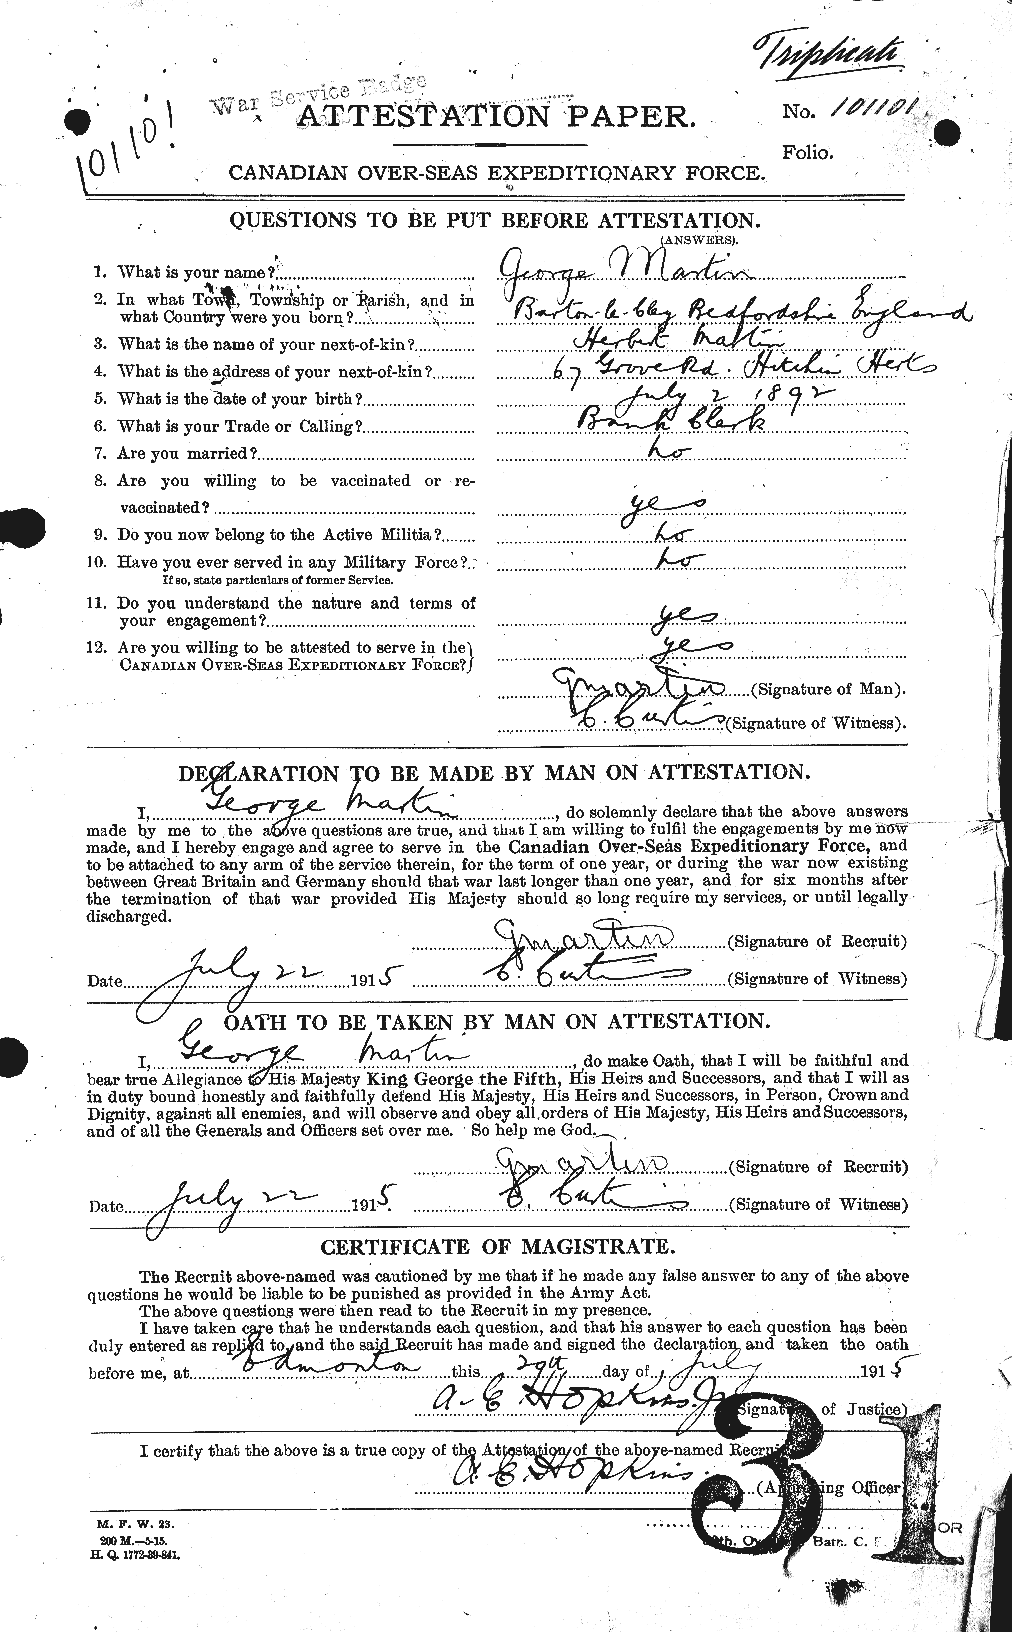 Personnel Records of the First World War - CEF 484956a